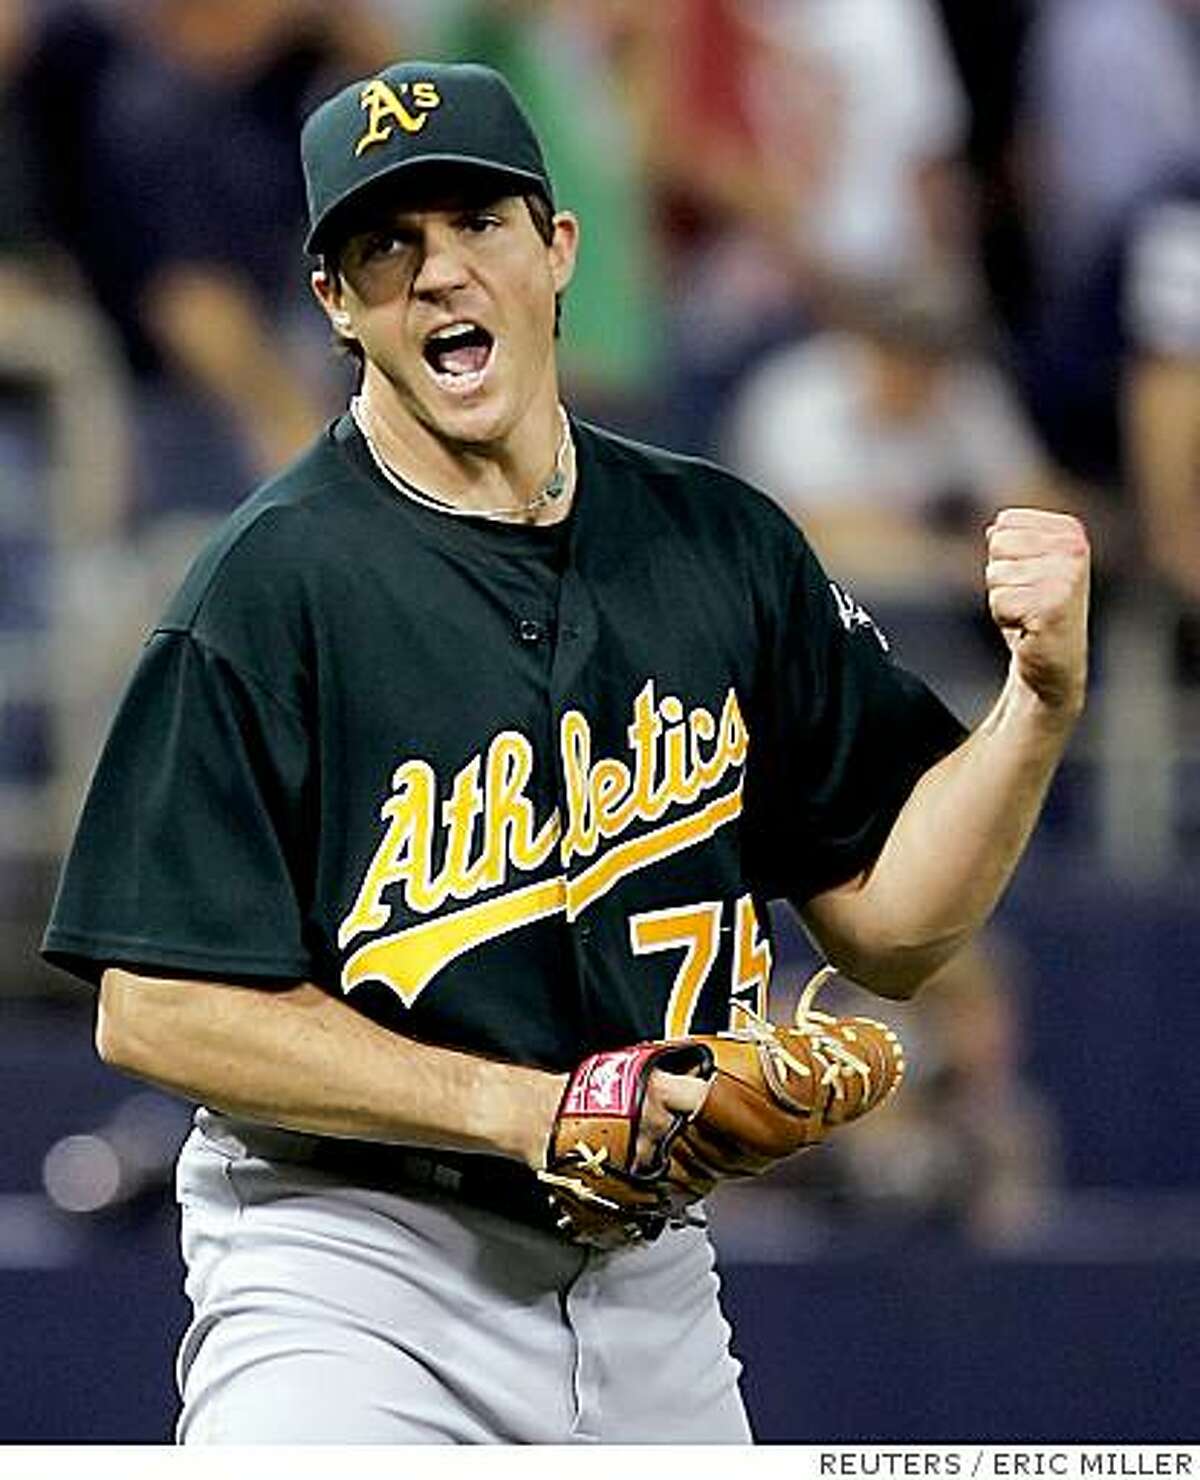 Oakland Athletics starting pitcher Barry Zito reacts to retiring Minnesota Twins batter Joe Mauer to end the eighth inning of Game 1 of the American League Divisional Series in Minneapolis, Minnesota in this October 3, 2006 file photo.